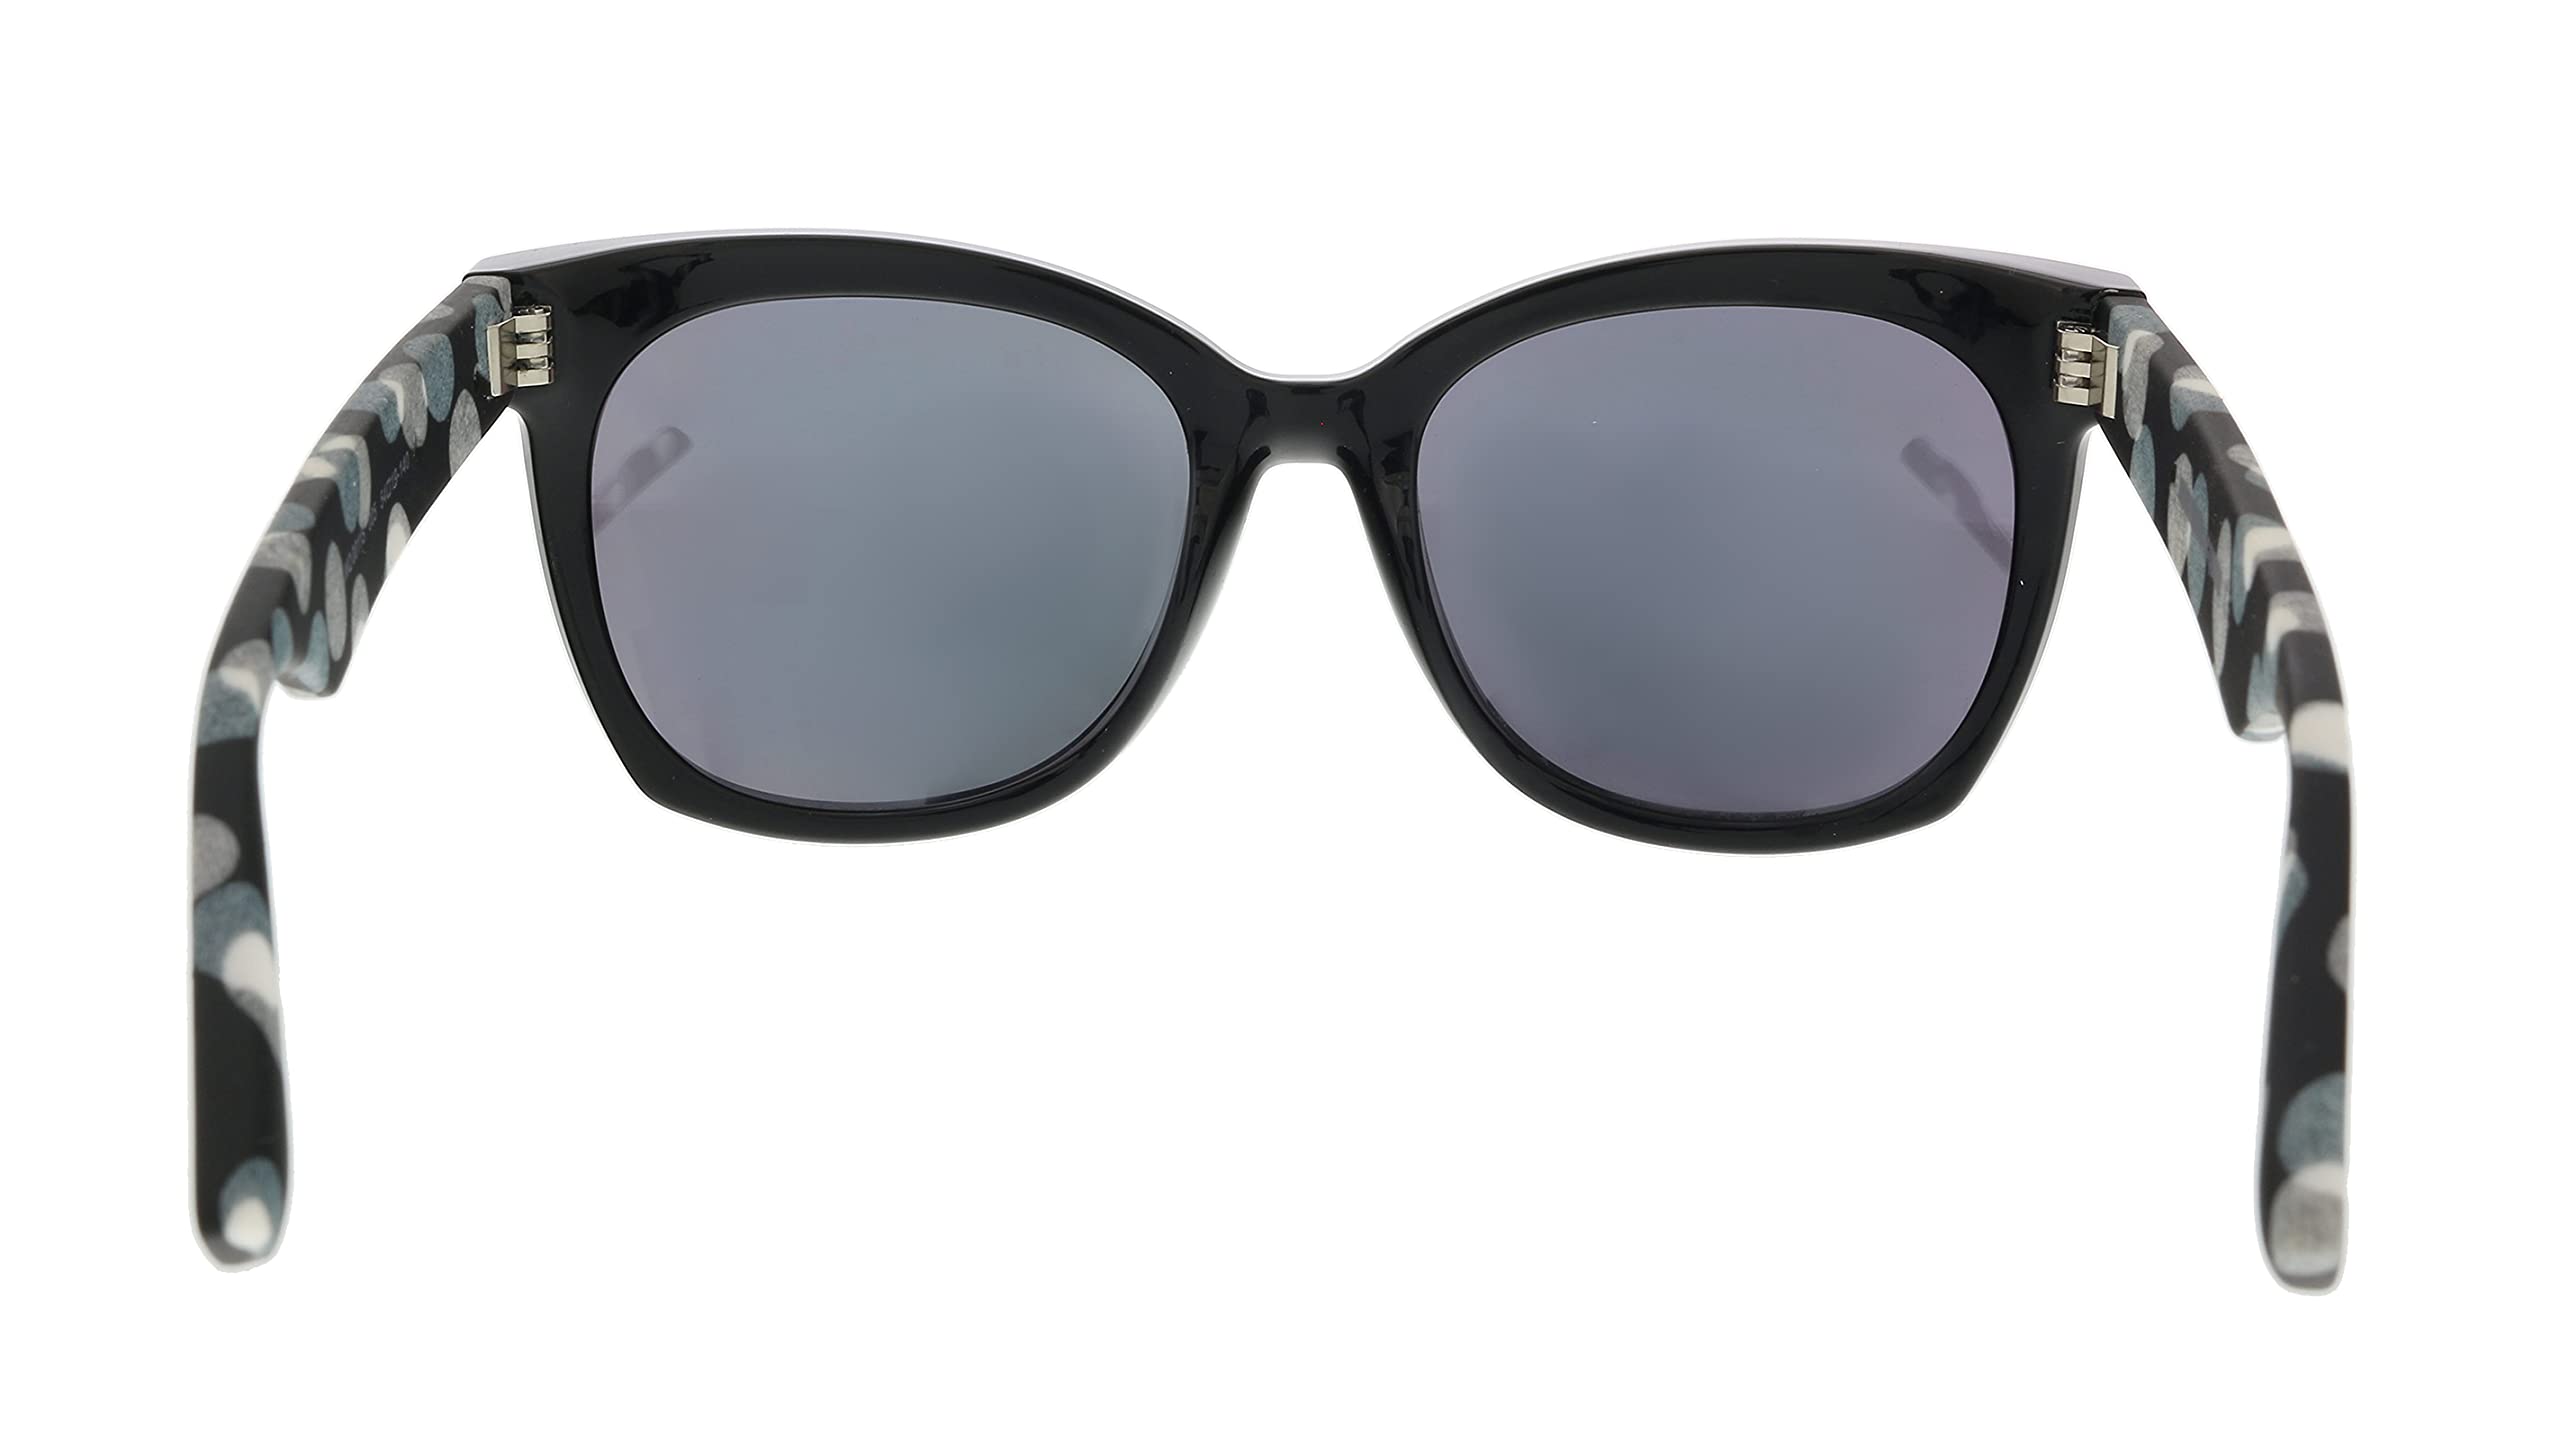 McQ 0011S 005 Black/White / Silver 0011S Cats Eyes Sunglasses Lens Category 3